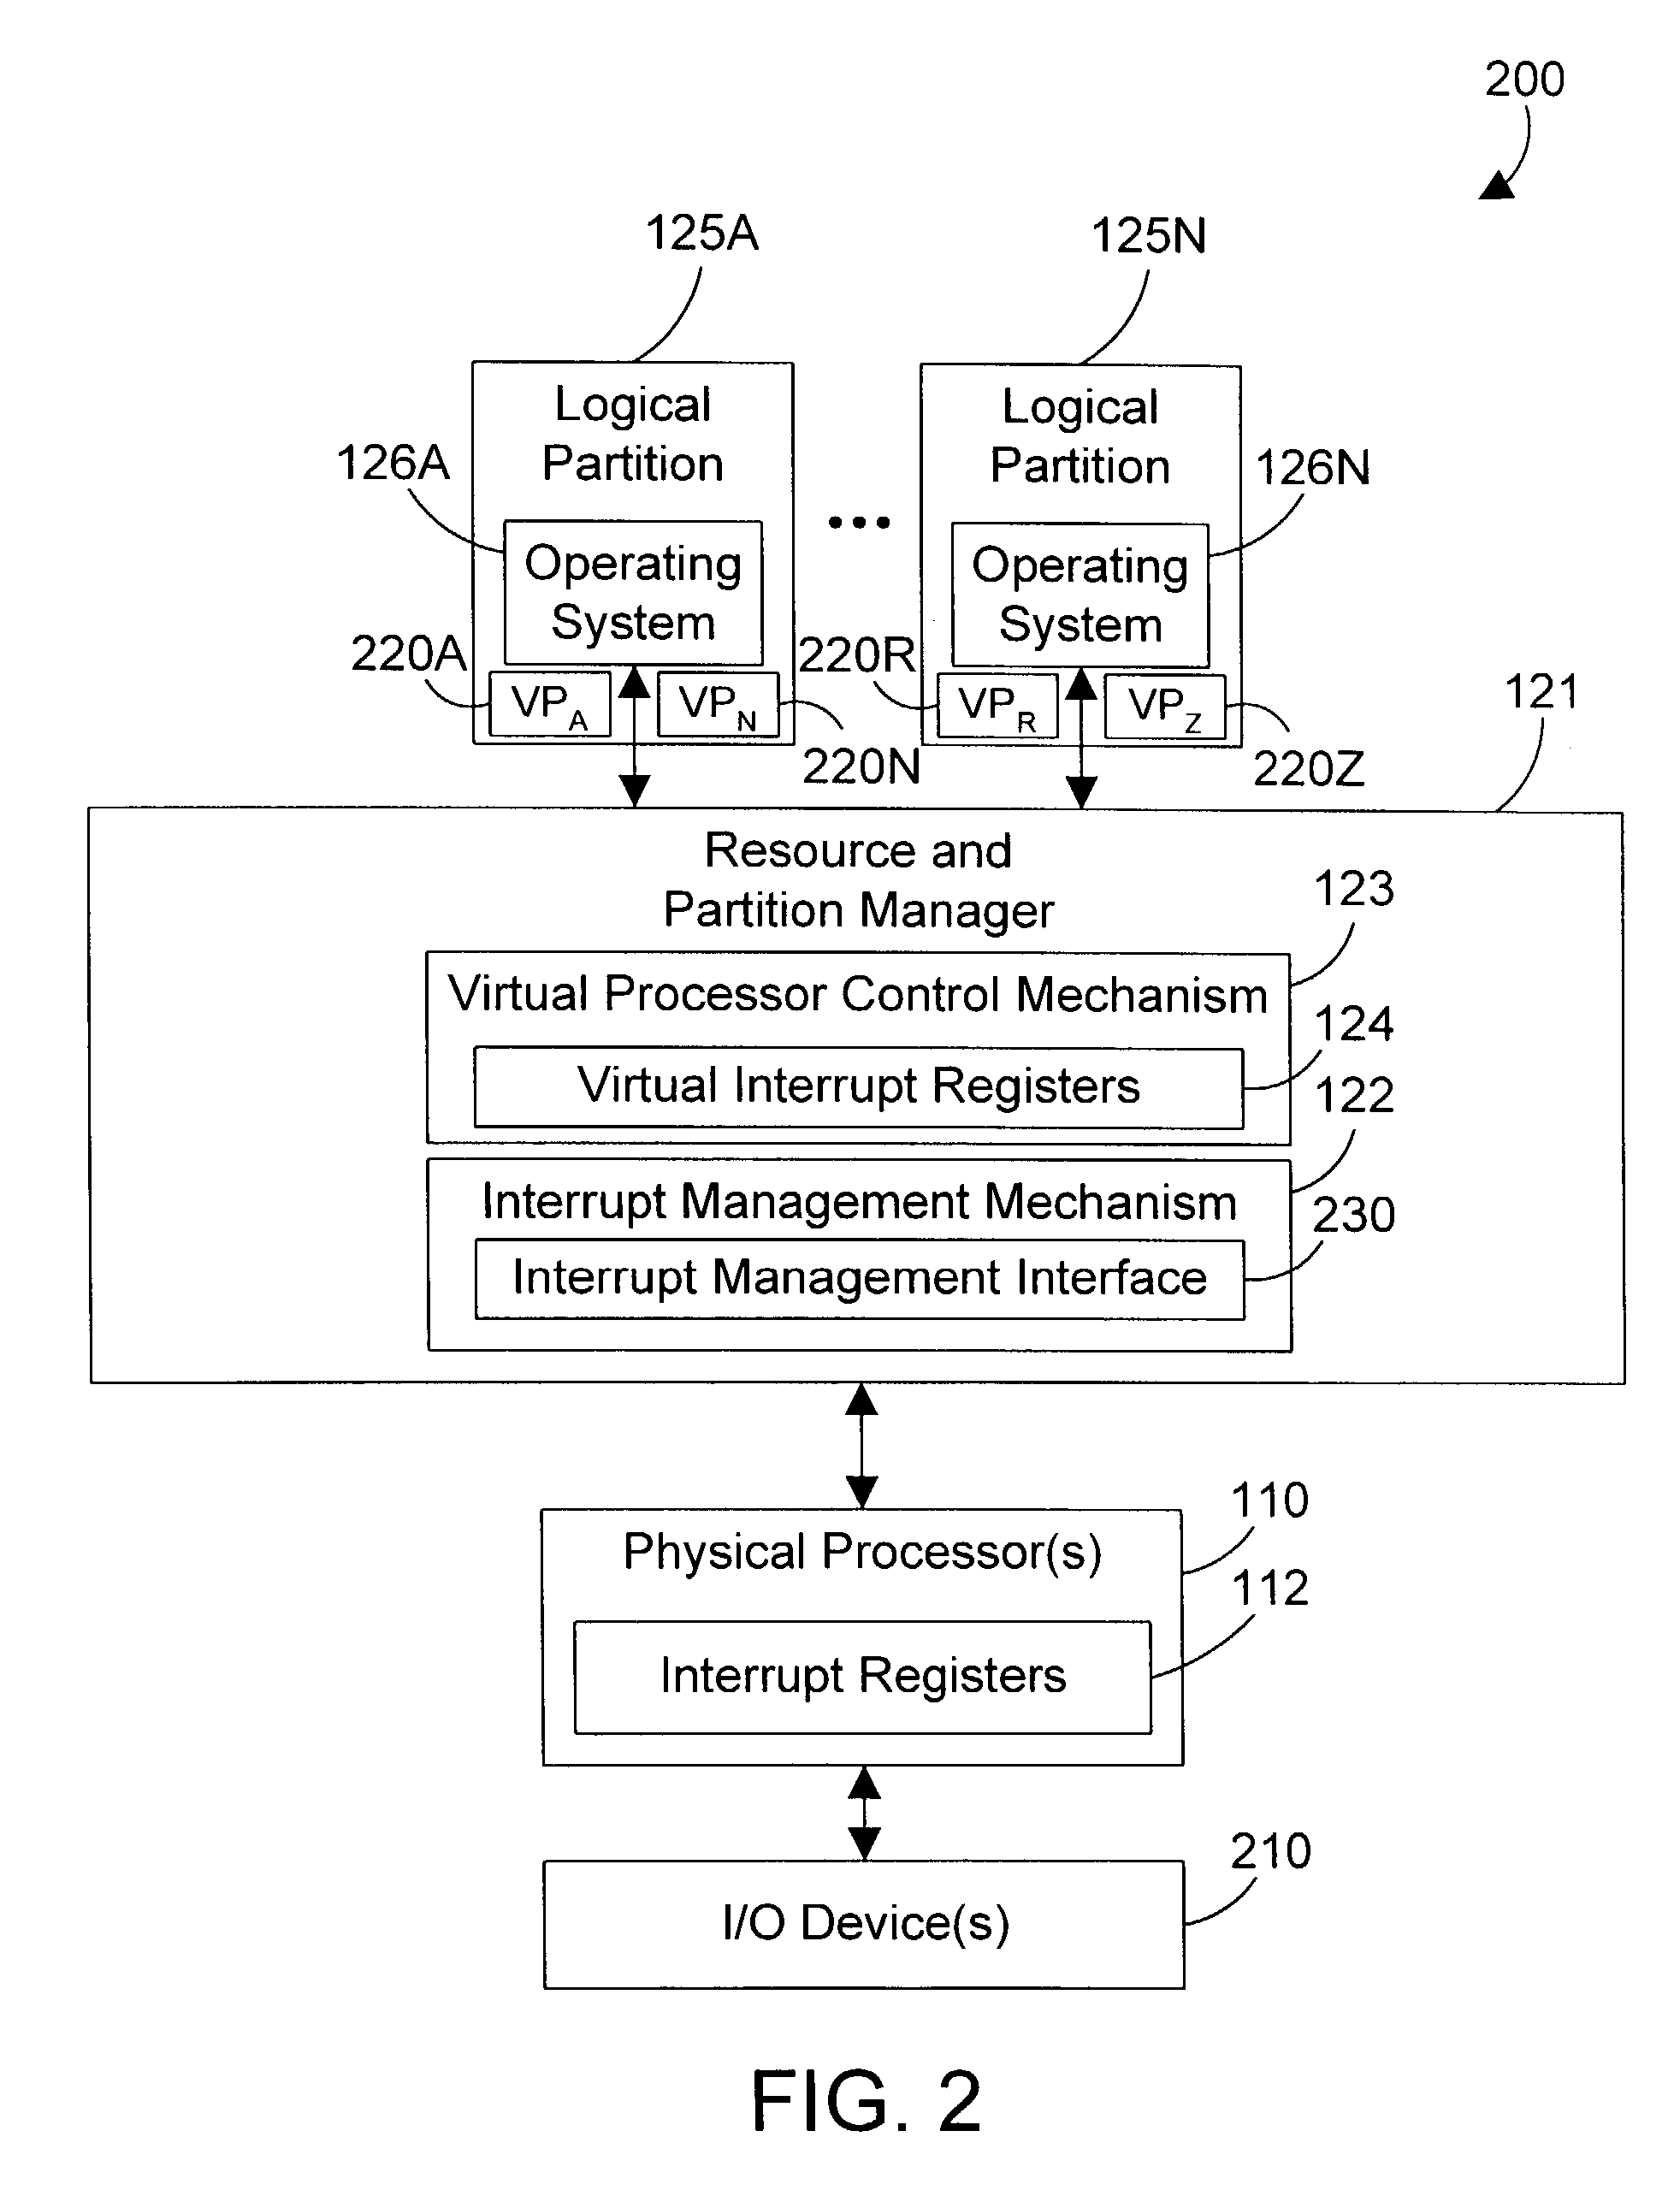 Apparatus and method for virtualizing interrupts in a logically partitioned computer system